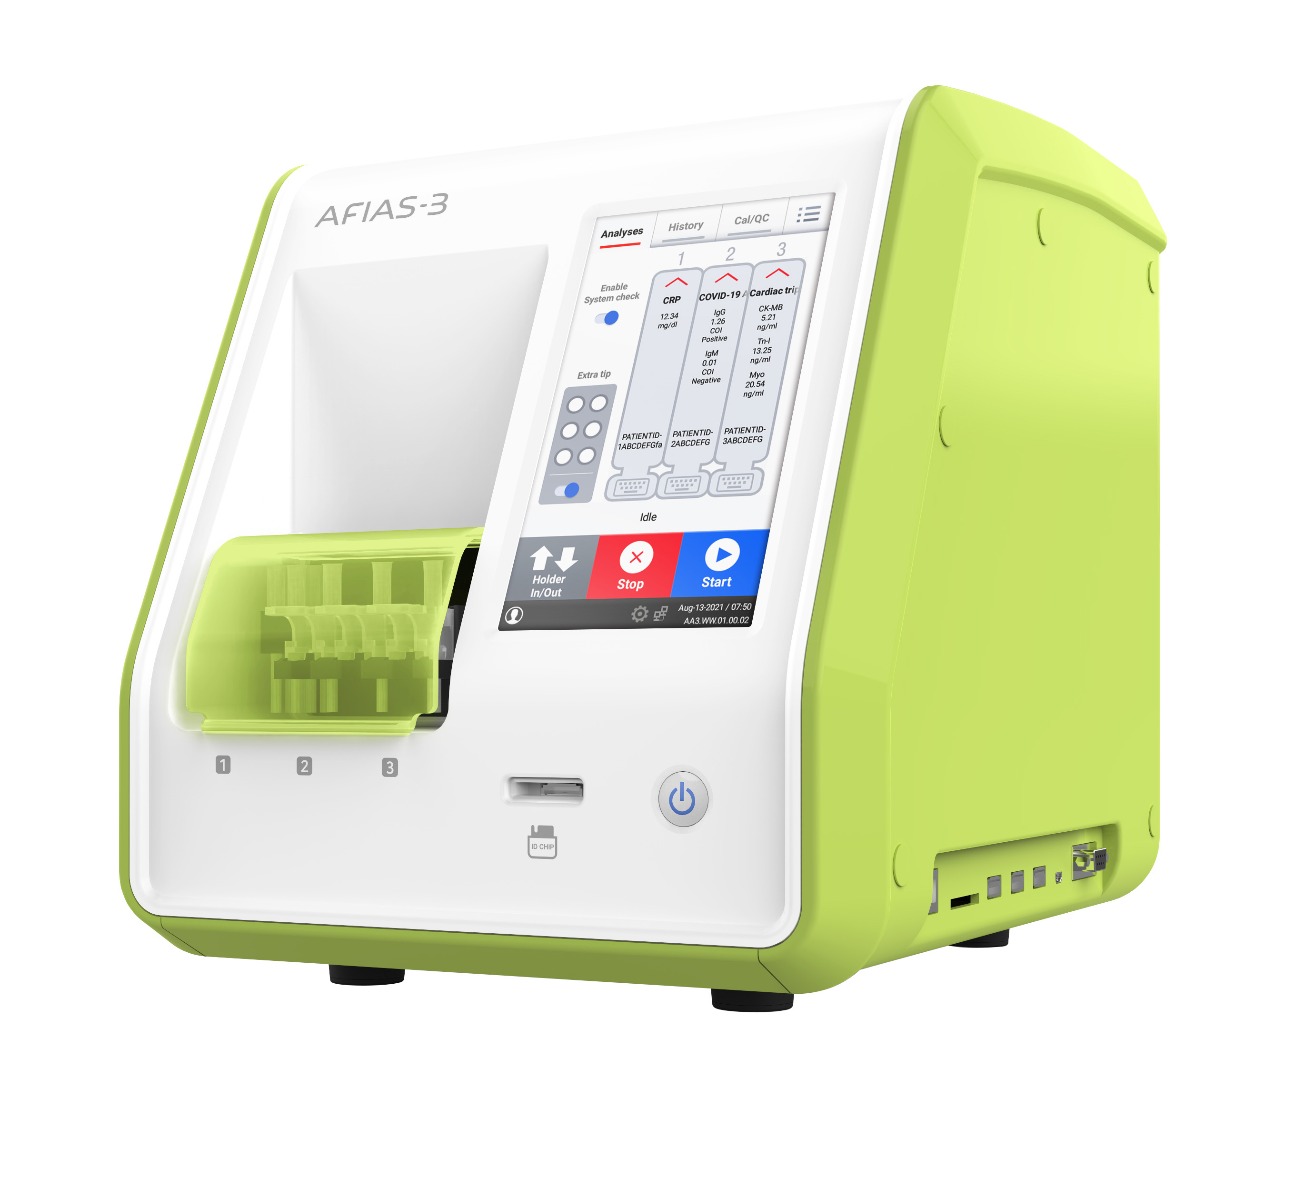 Afias-3 is an advanced immunoassay analyser for multiple testing with all-in-one cartridge system